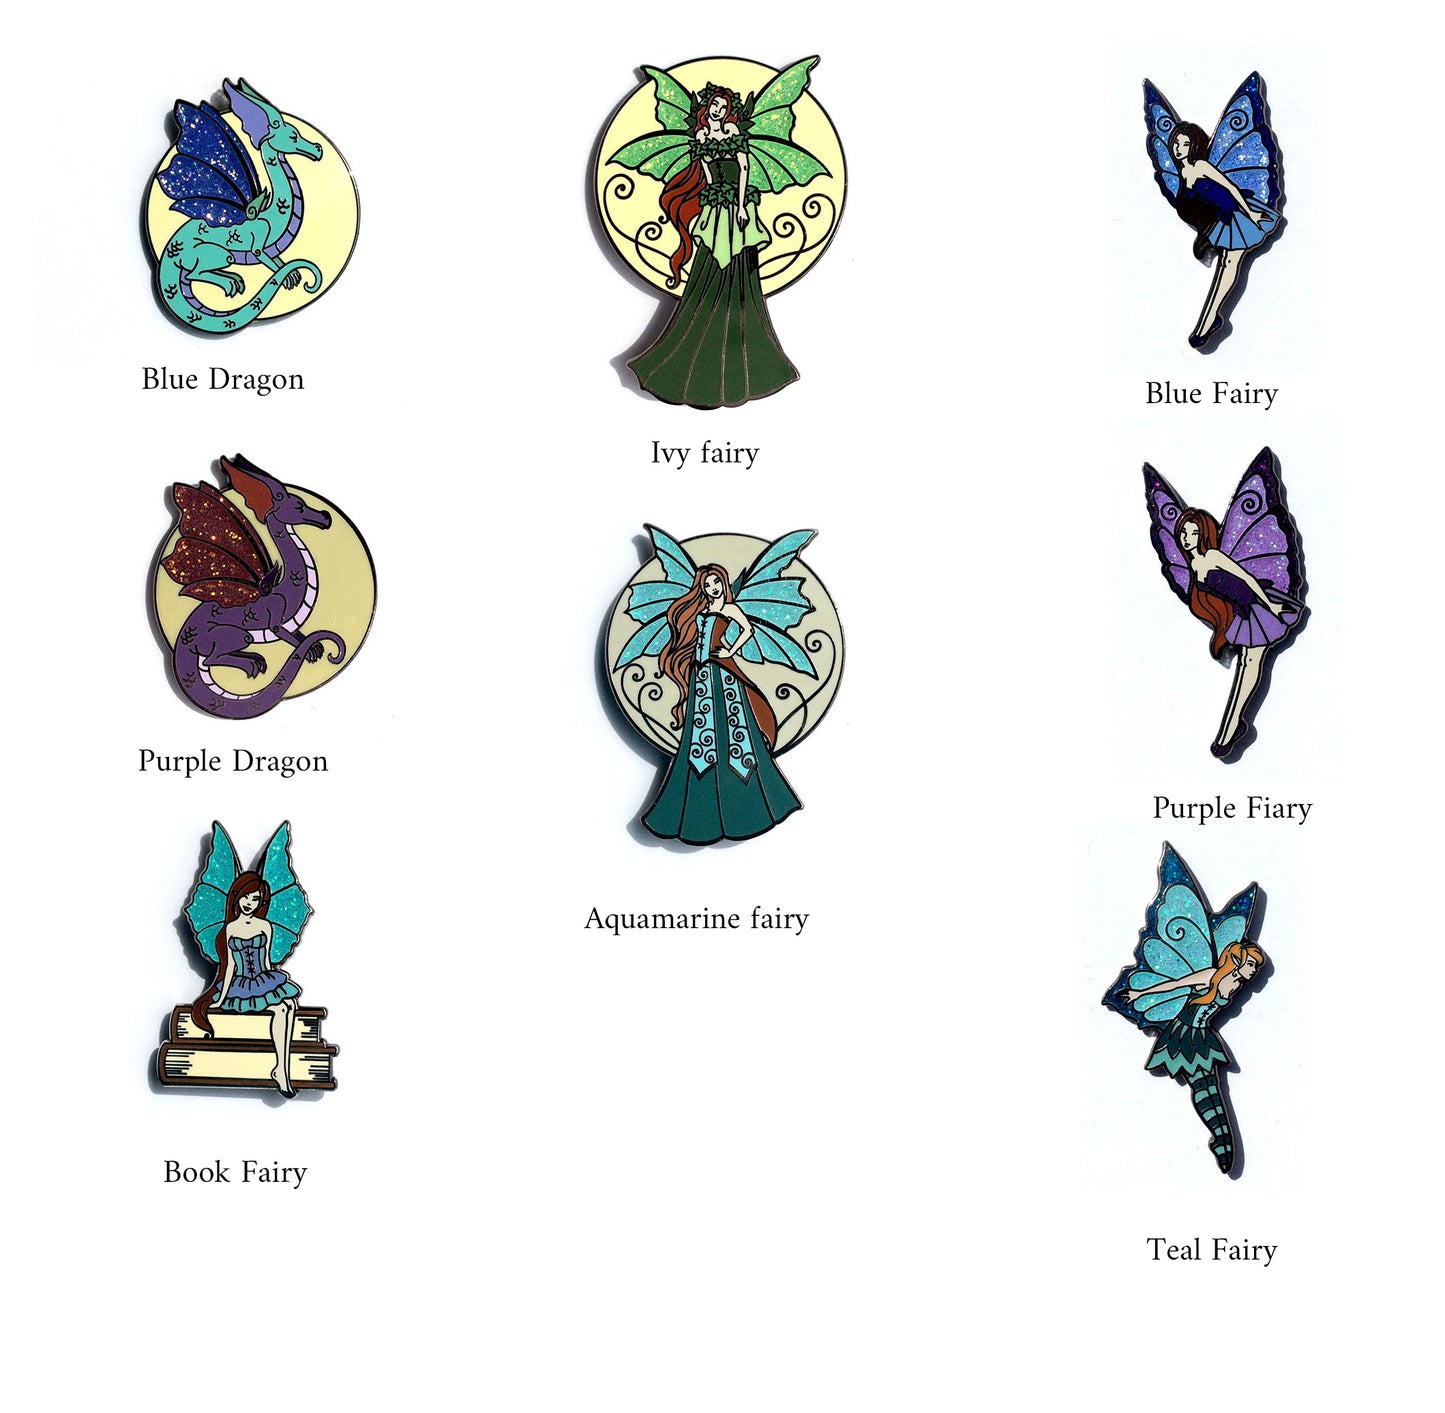 Blue Fairy af Amy Brown, Pin